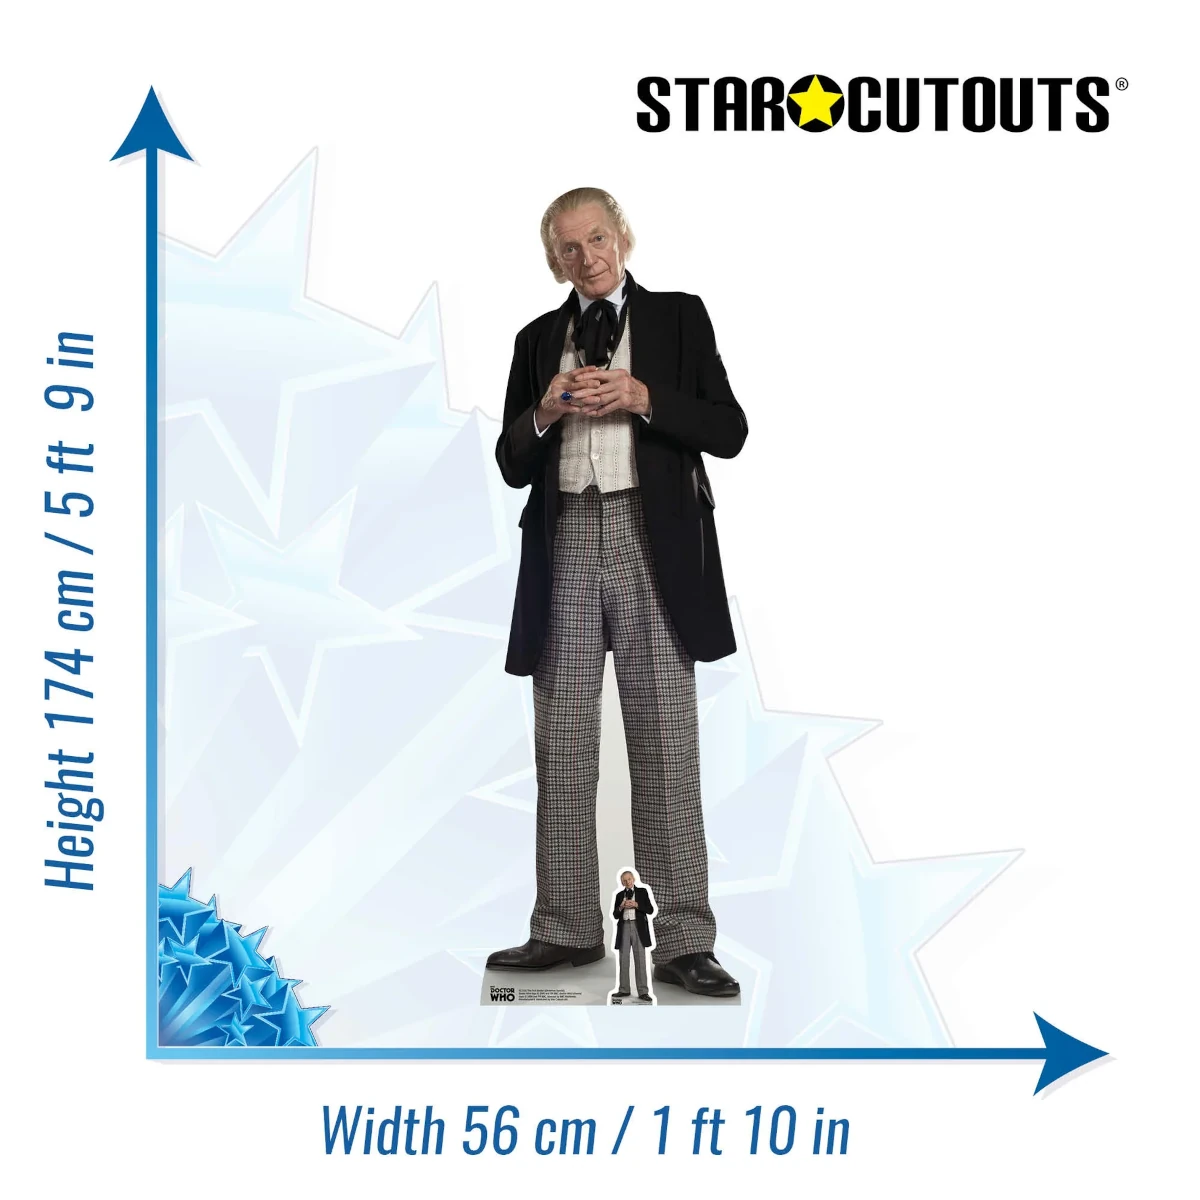 SC1116 First Doctor 'David Bradley' (Doctor Who) Official Lifesize + Mini Cardboard Cutout Standee Size